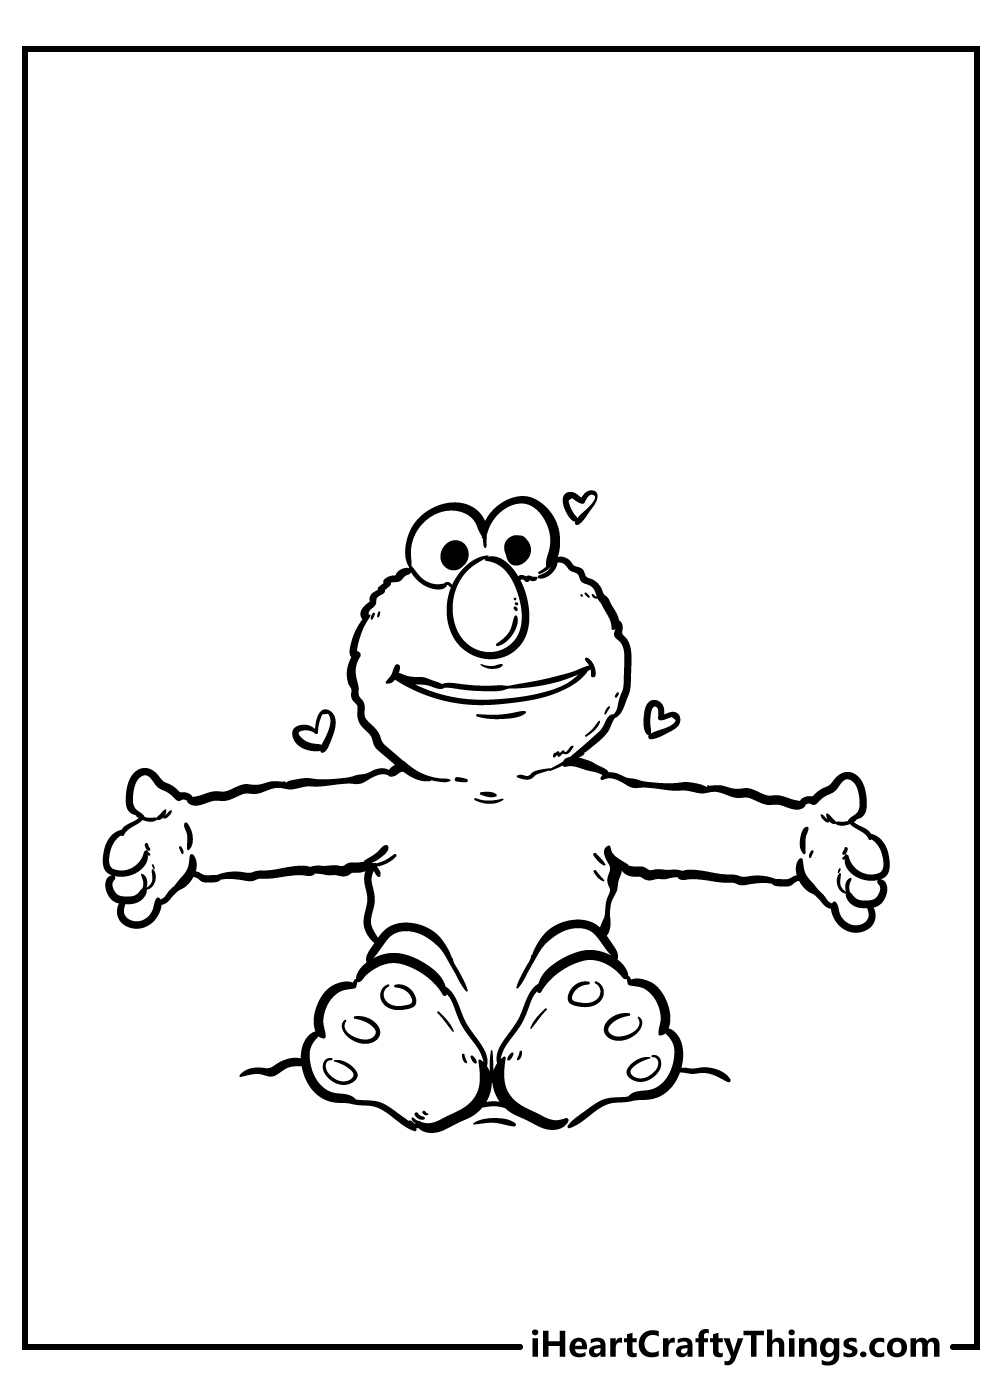 Elmo Coloring Pages for preschoolers free pdf